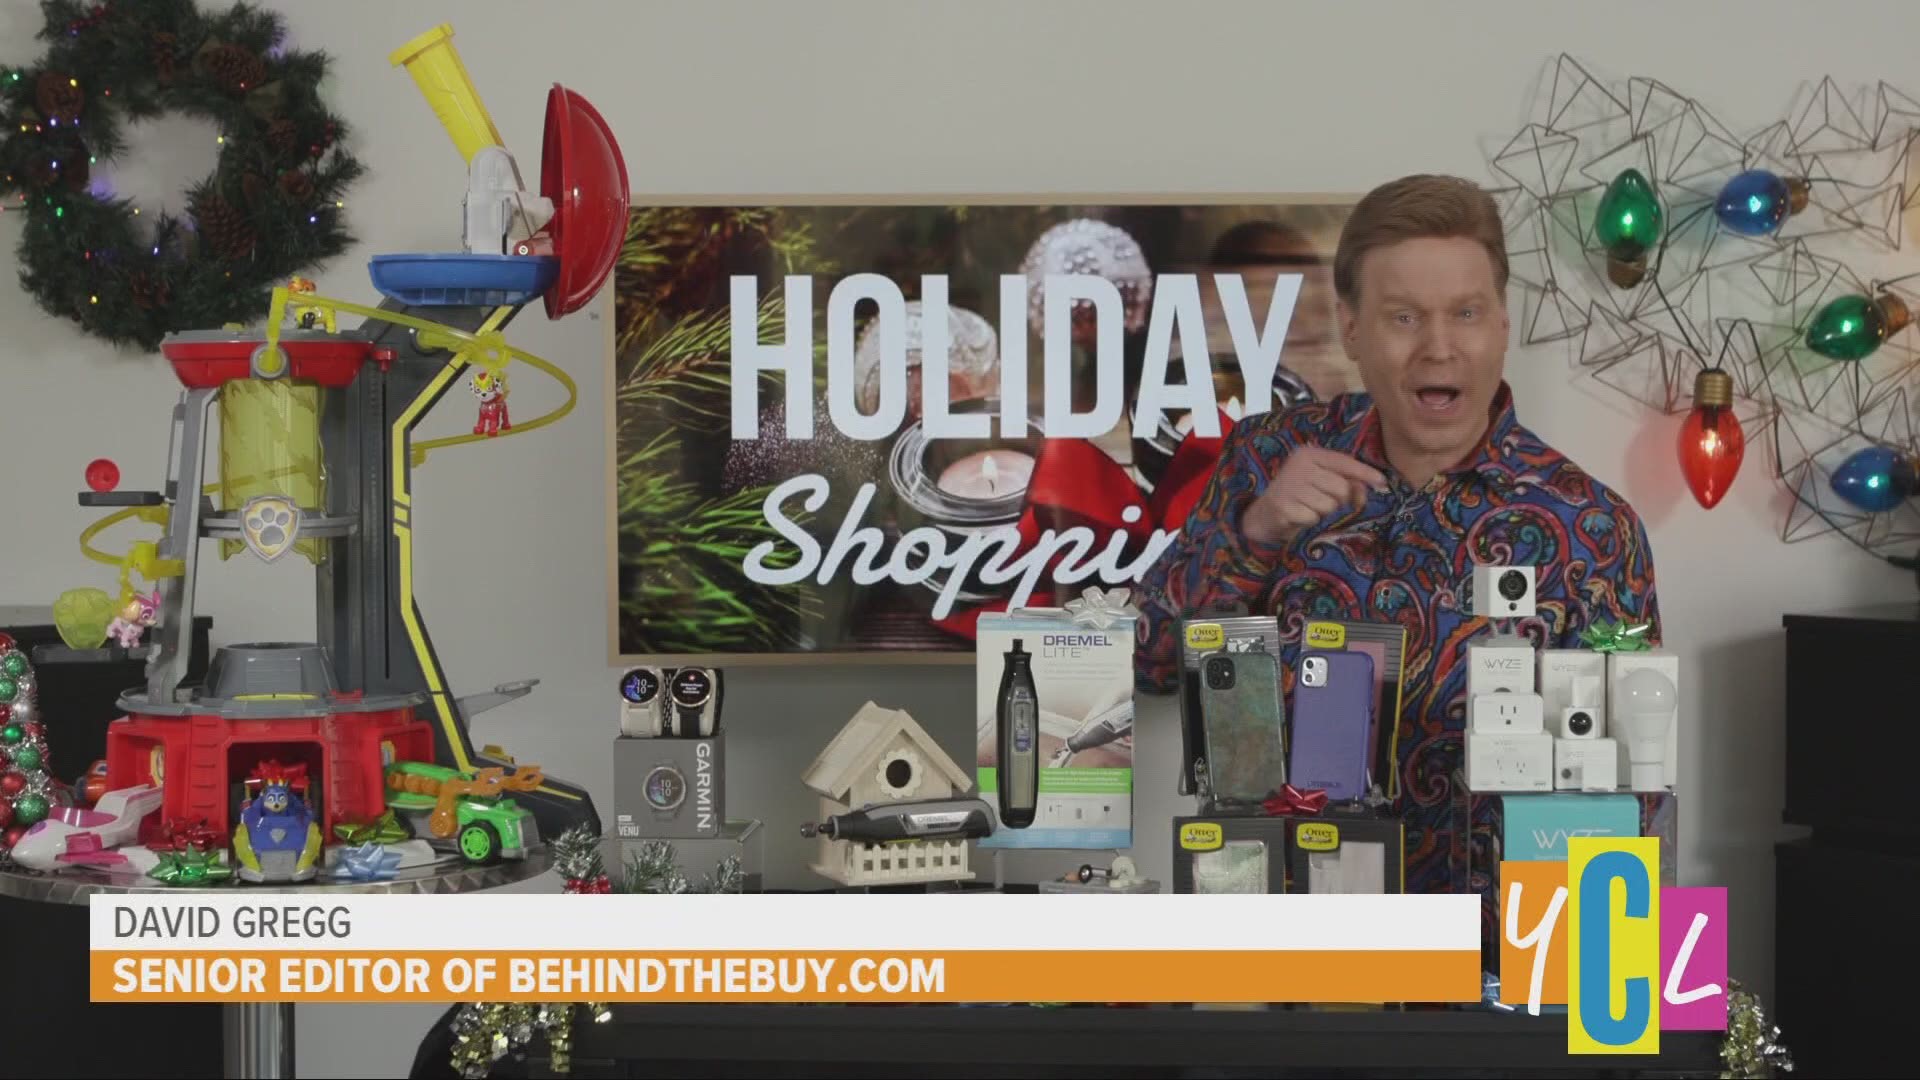 David Gregg - BehindTheBuy.com’s Senior Editor - joins us with his top gift picks to help everyone achieve their 2019 gifting goals. The following is a paid segment.